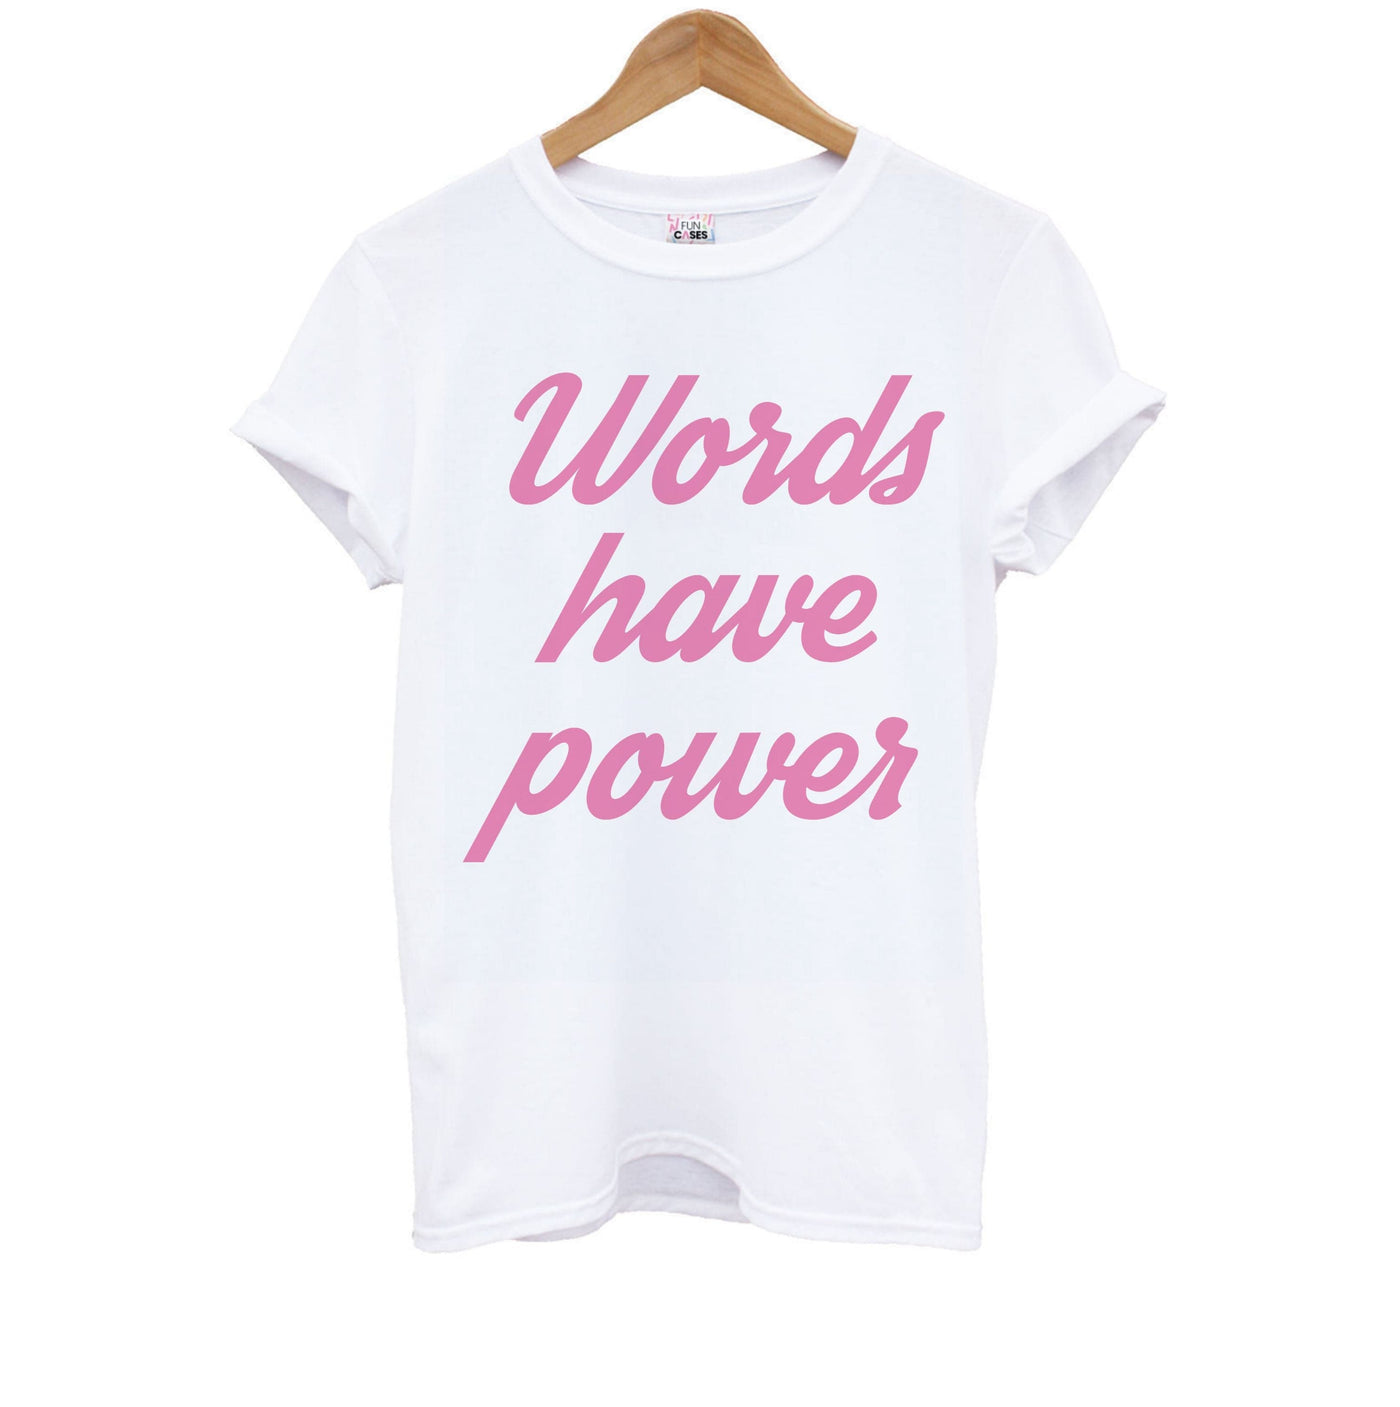 Words Have Power - The Things We Never Got Over Kids T-Shirt